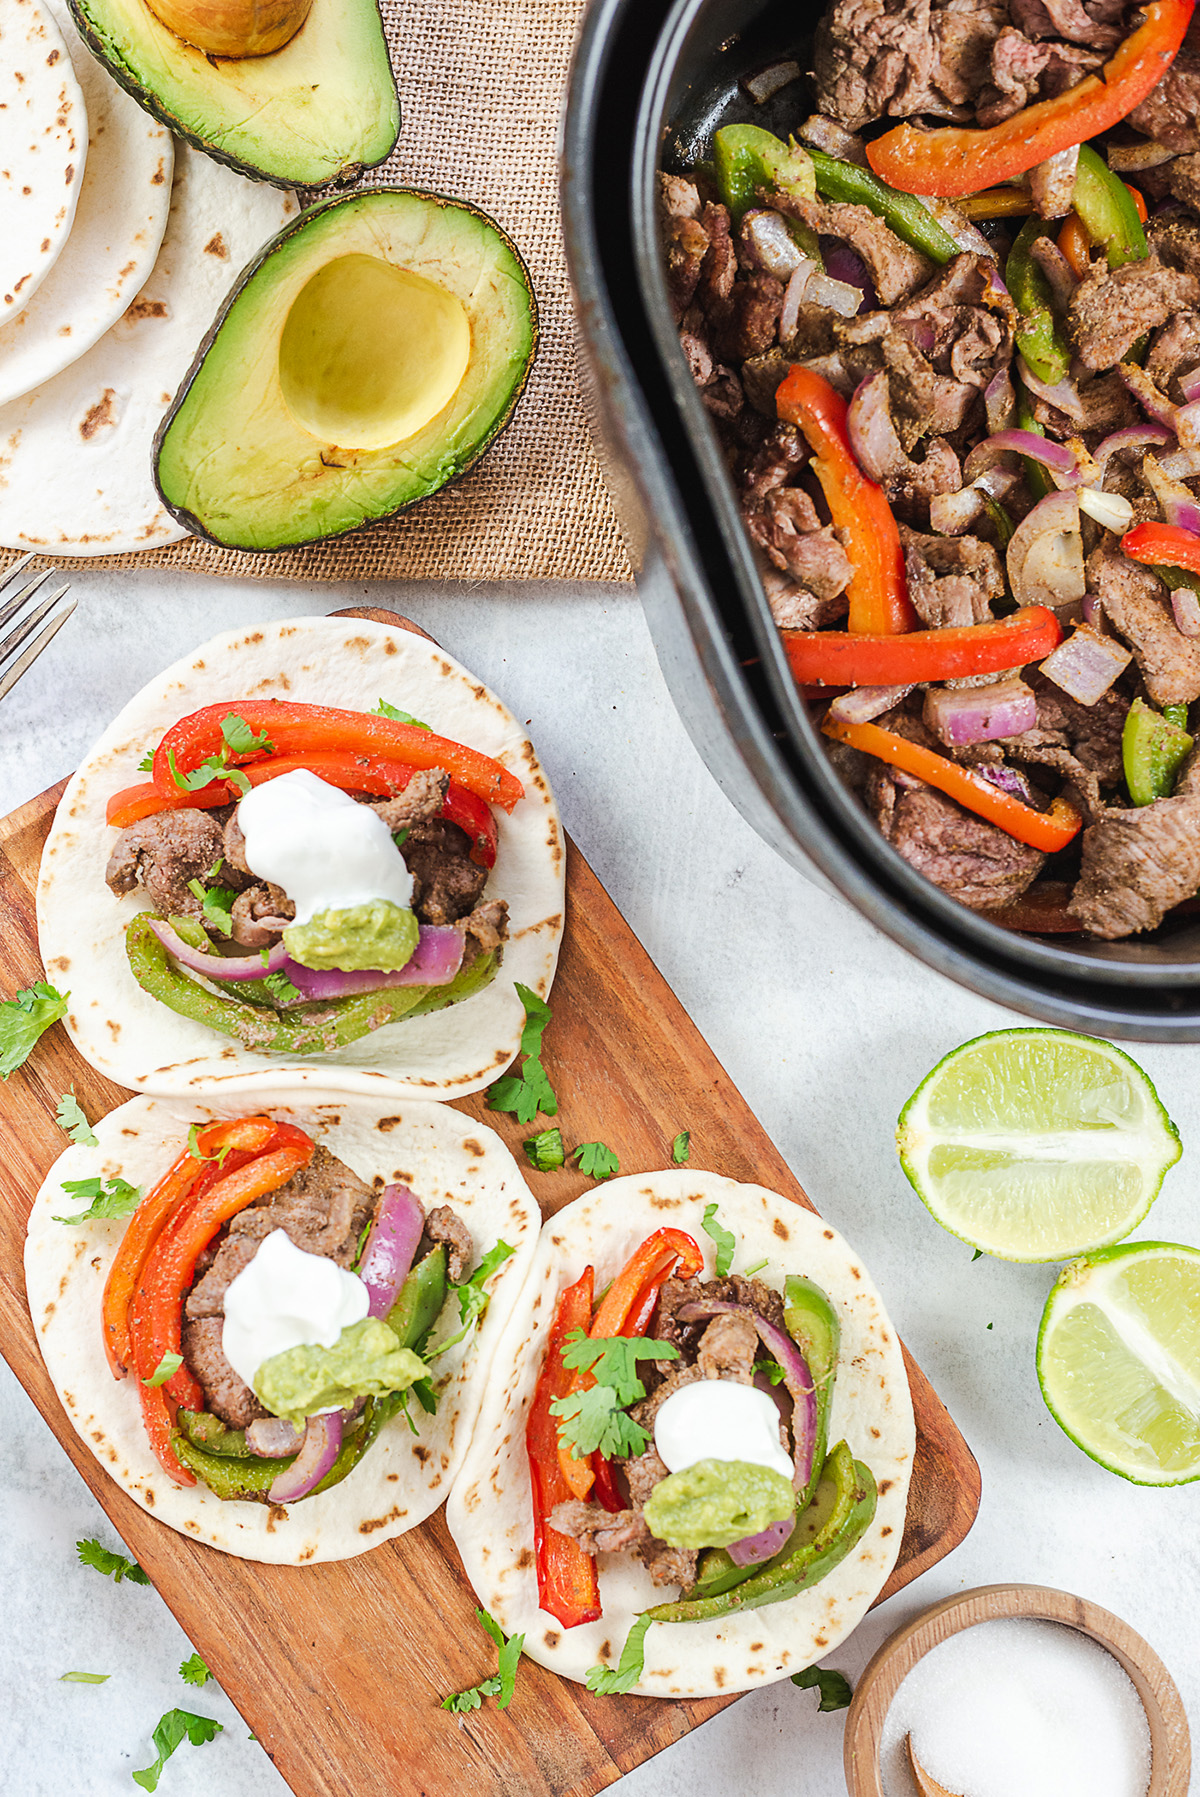 Steak fajitas and avocados in front of an air fryer basket.